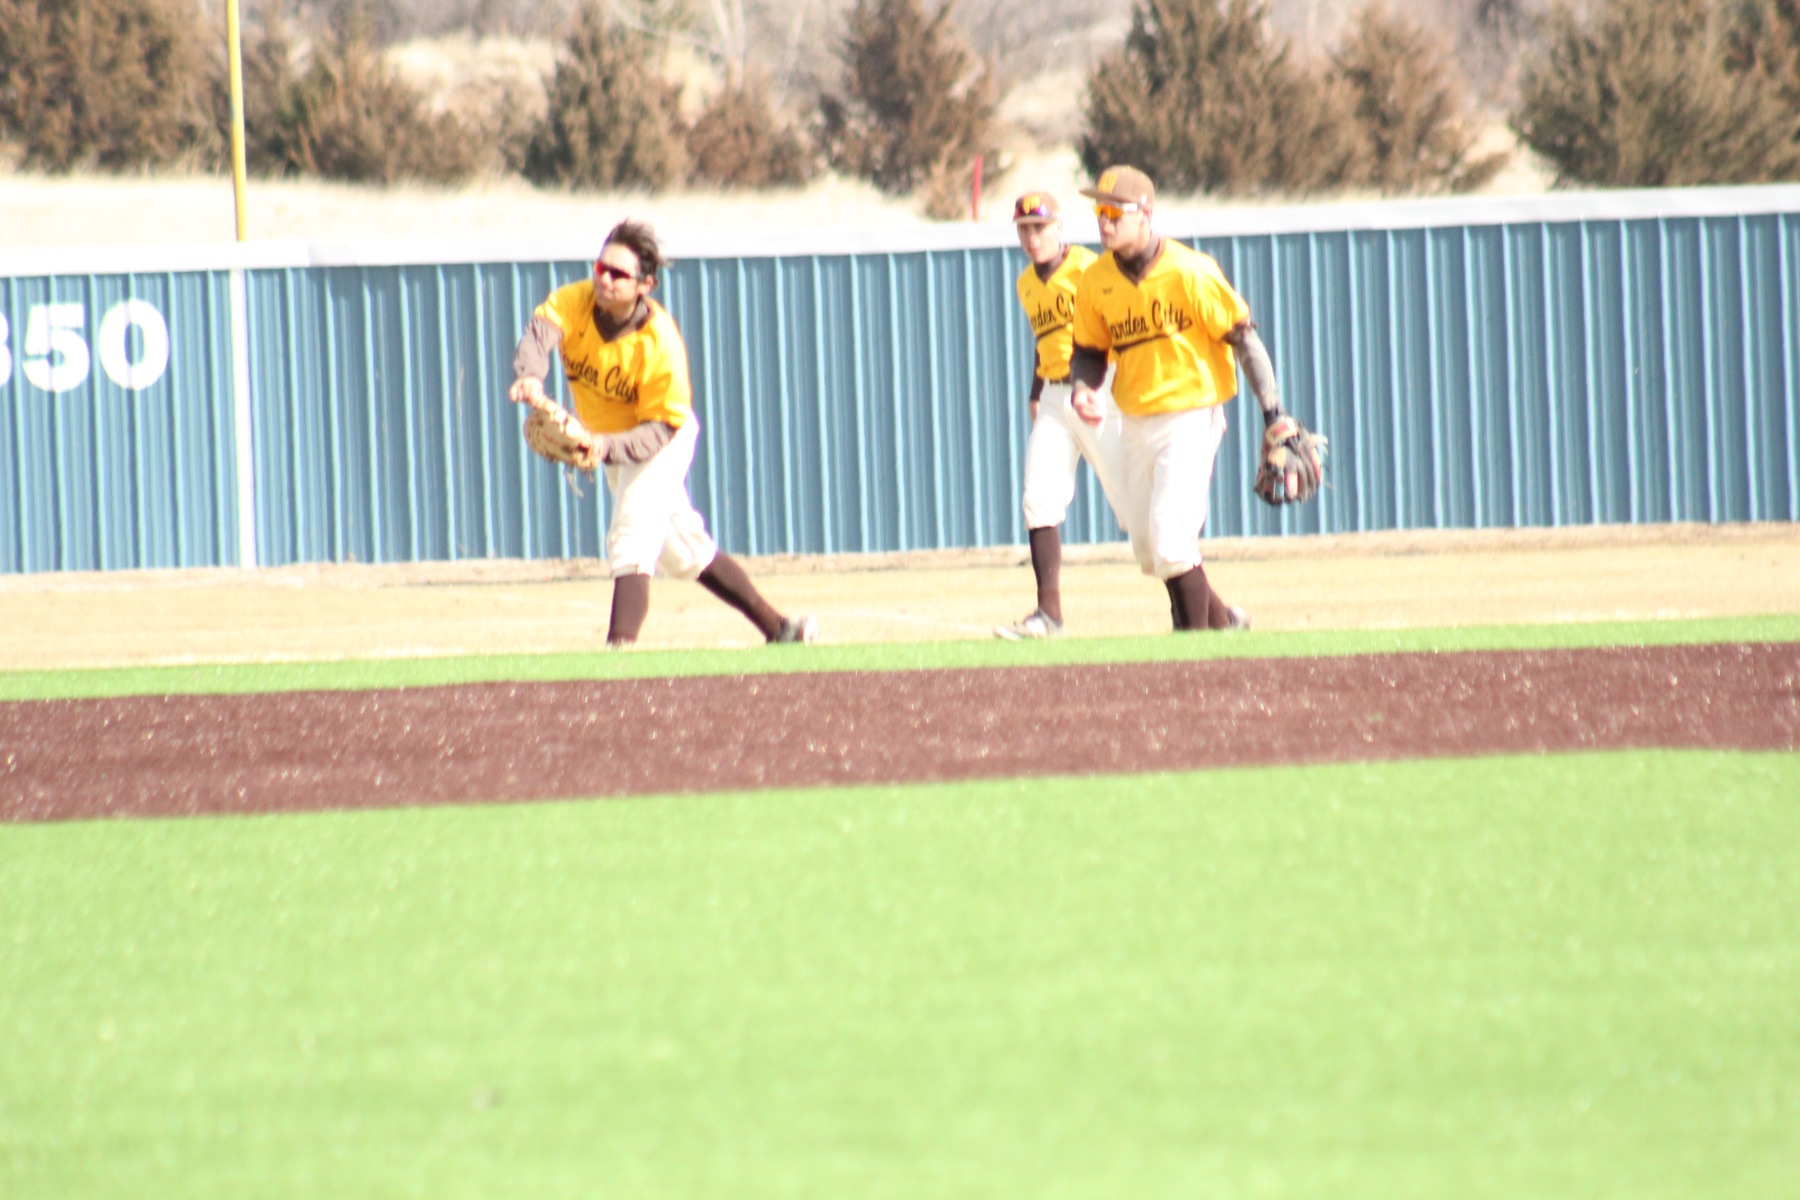 Broncbusters close strong; knock out Otero in the 10th